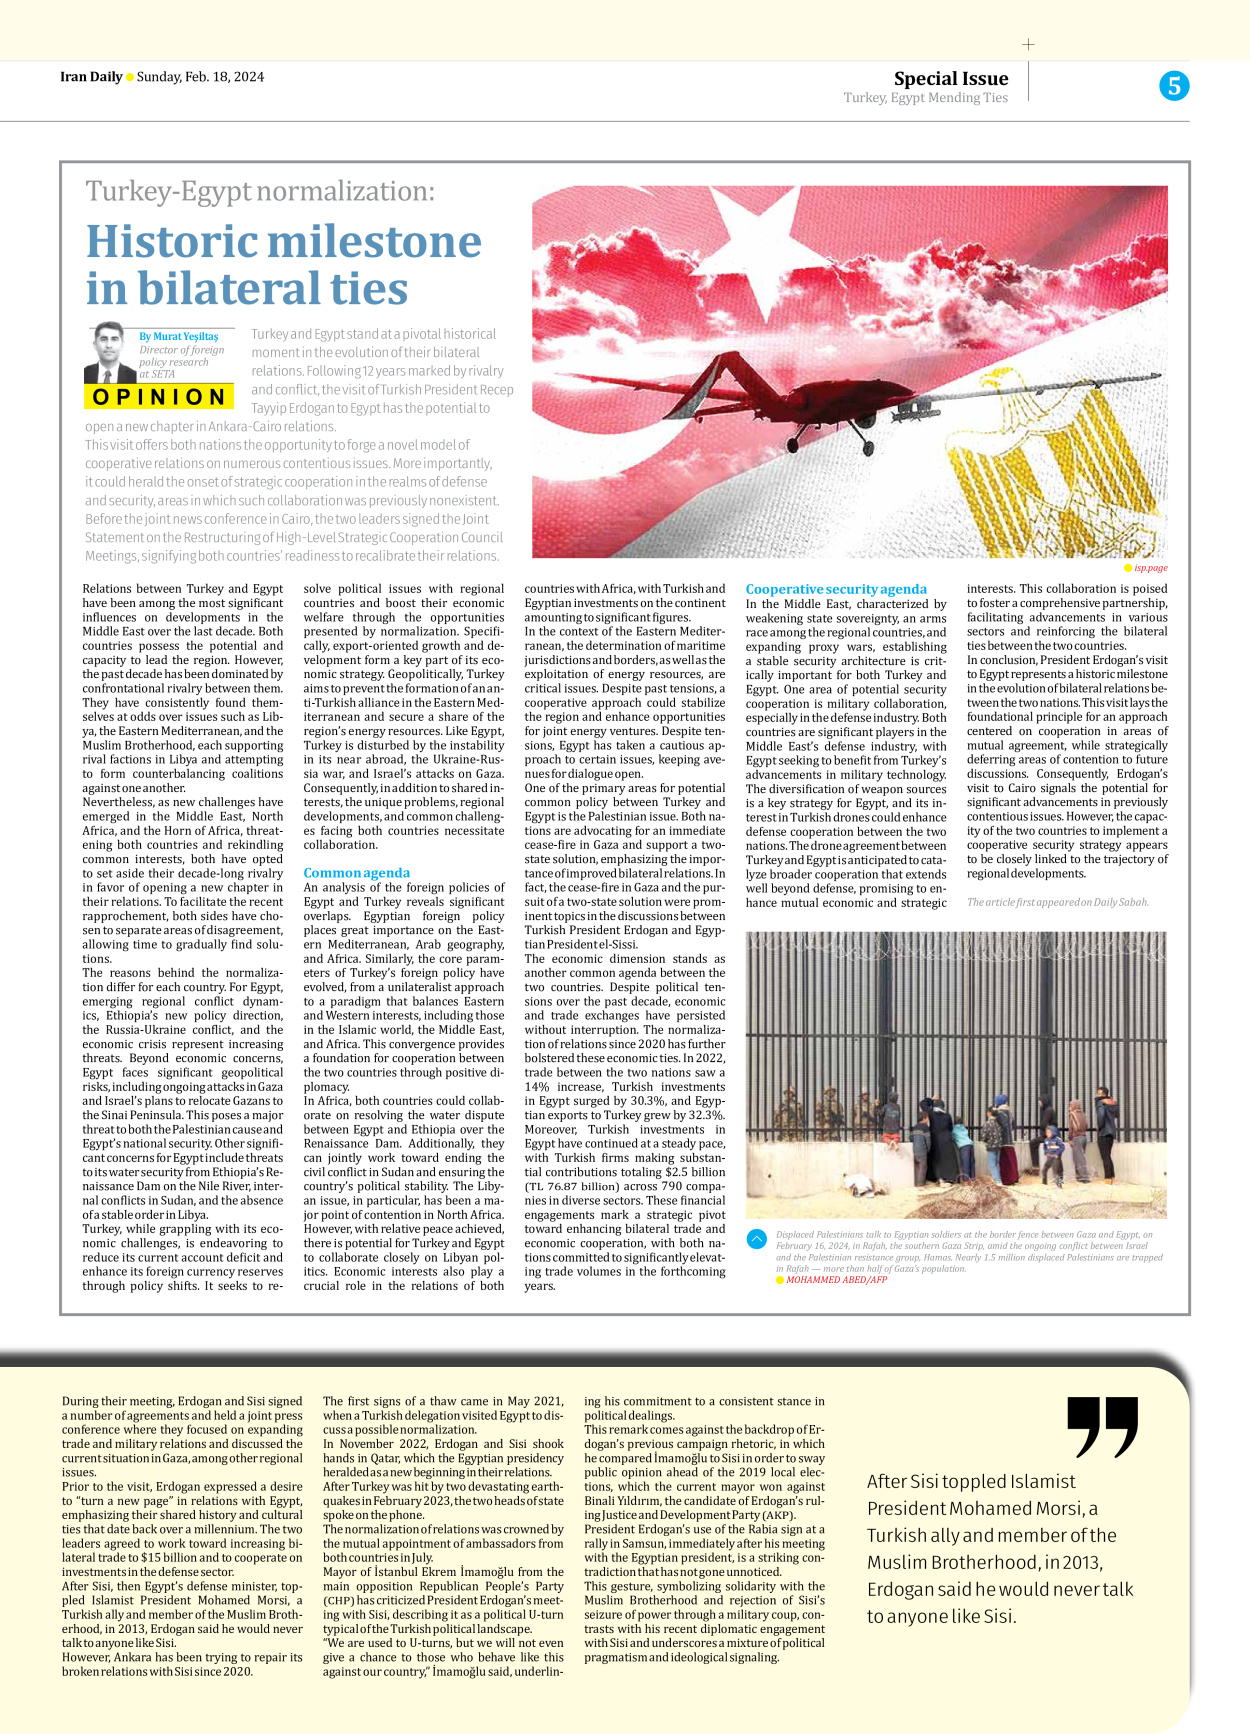 Iran Daily - Number Seven Thousand Five Hundred and Ten - 18 February 2024 - Page 5